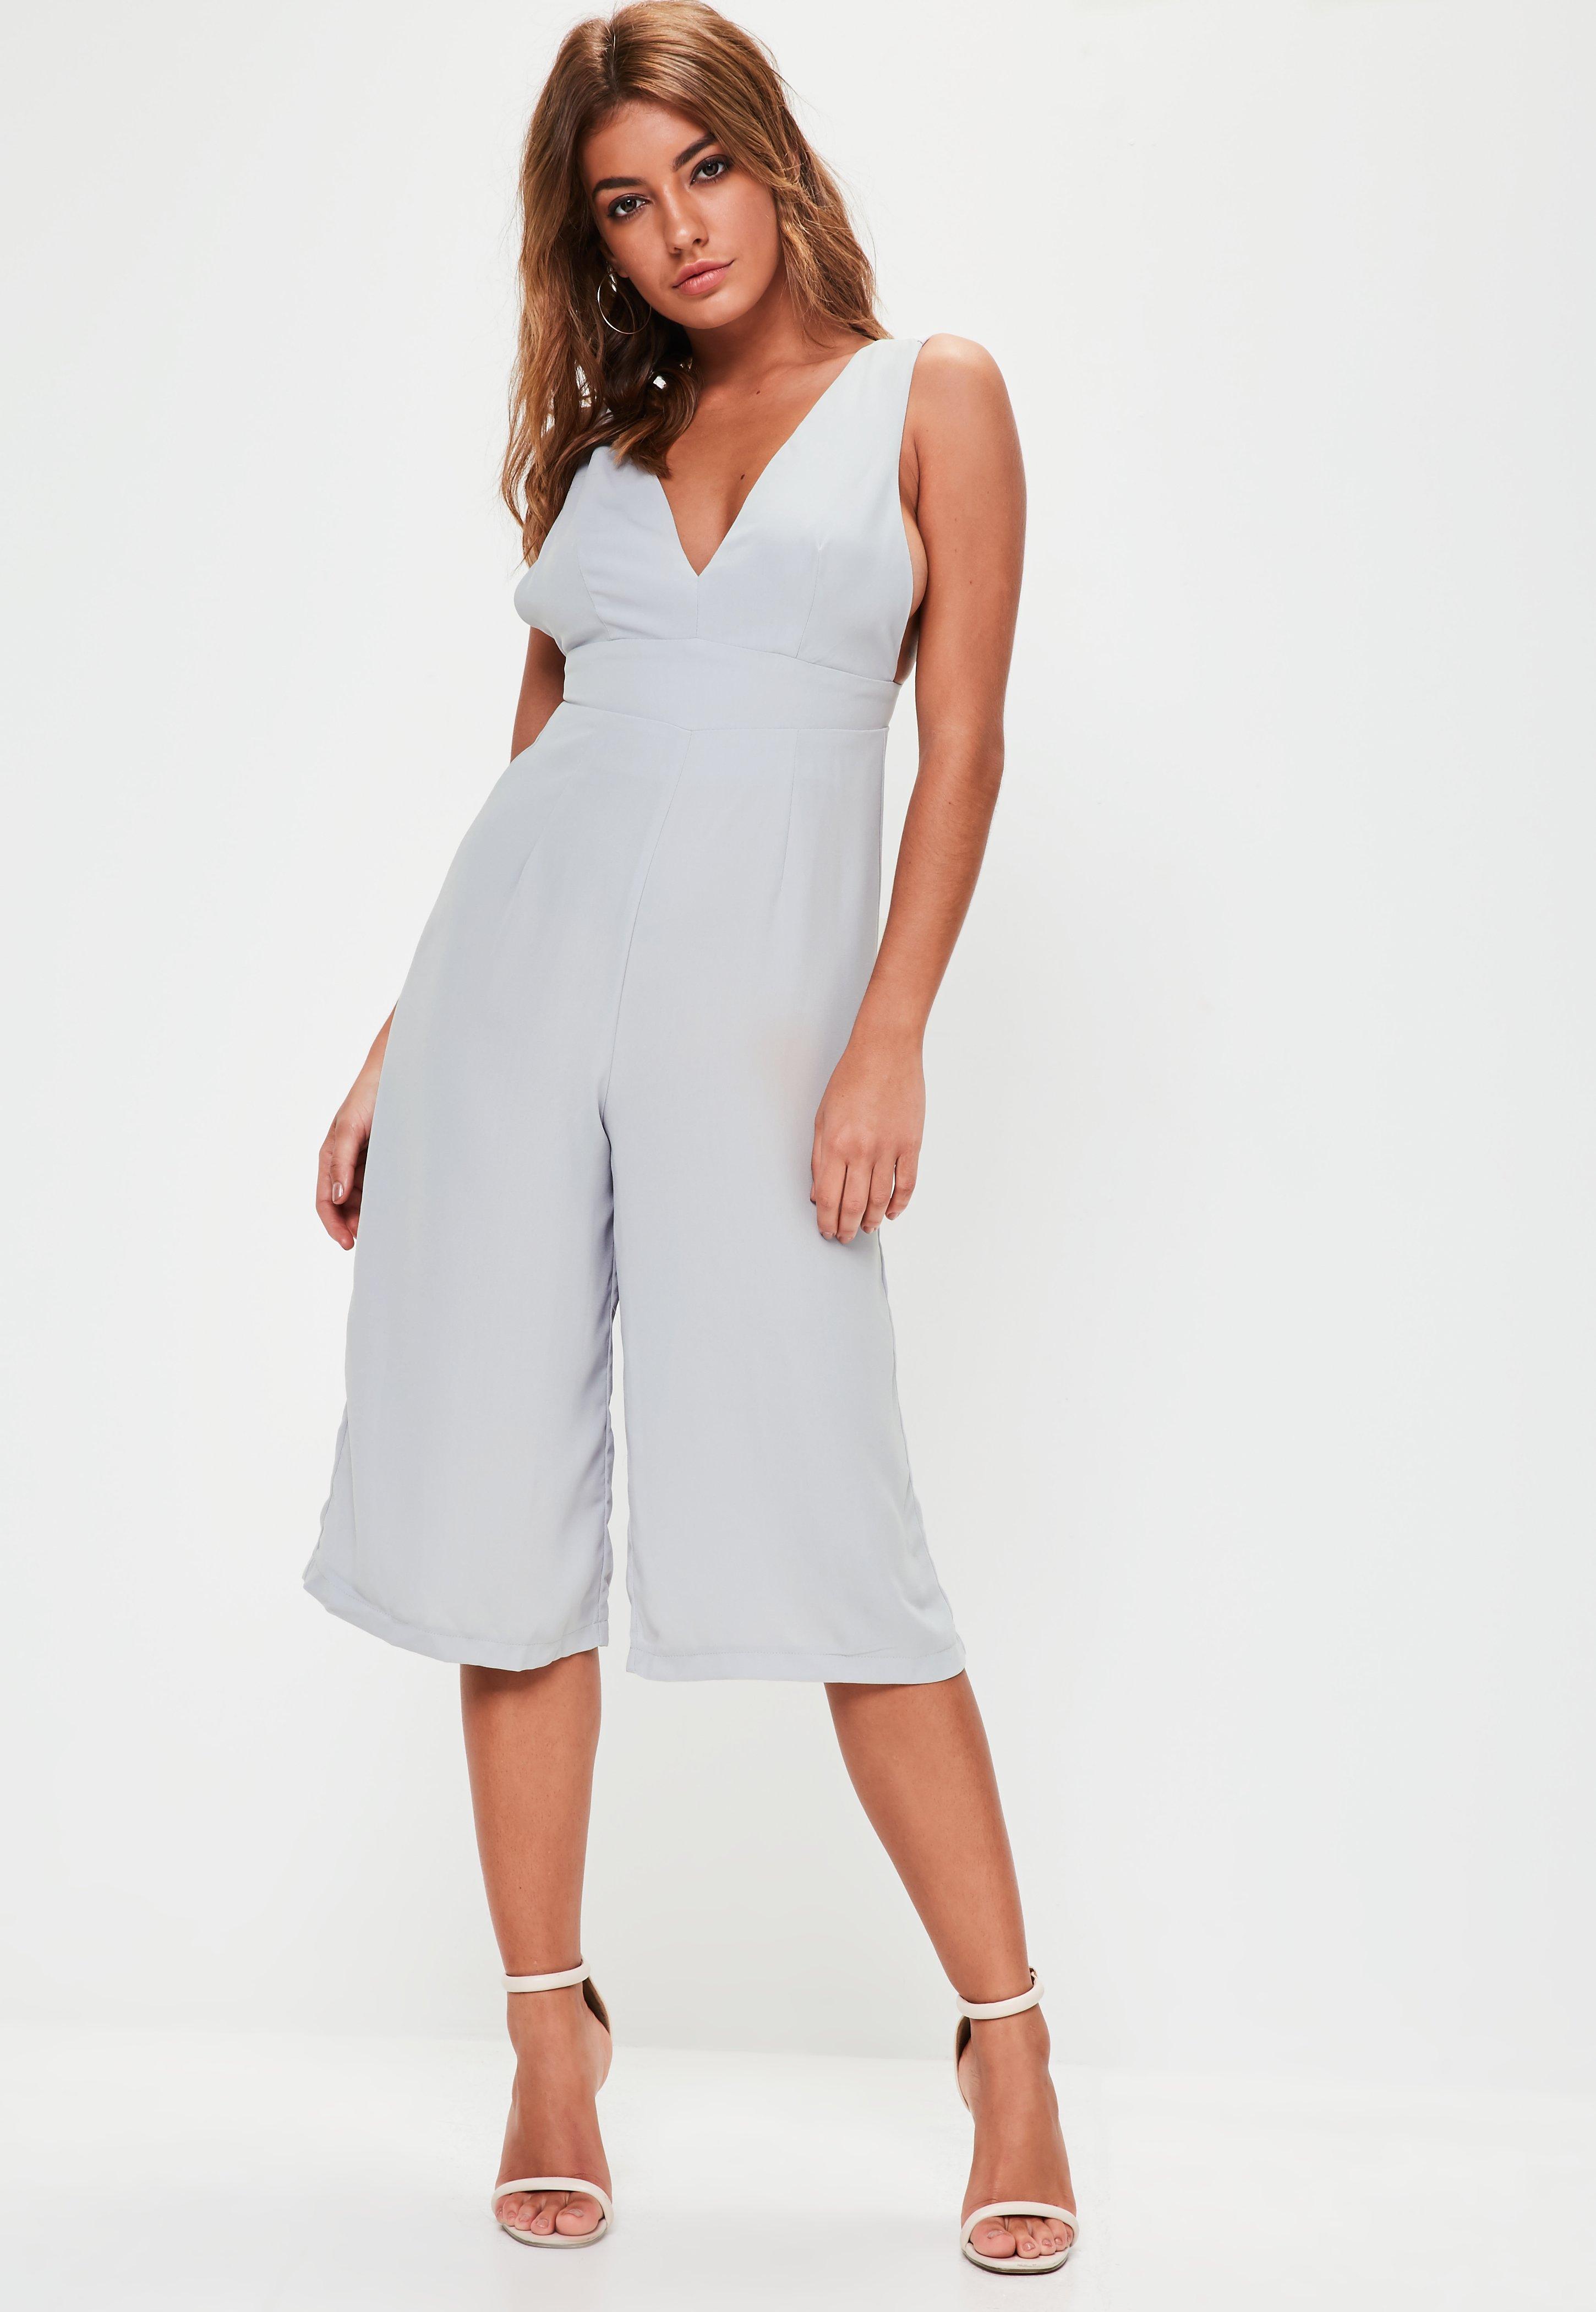 Lyst - Missguided Grey Plunge Front Culotte Jumpsuit in Gray